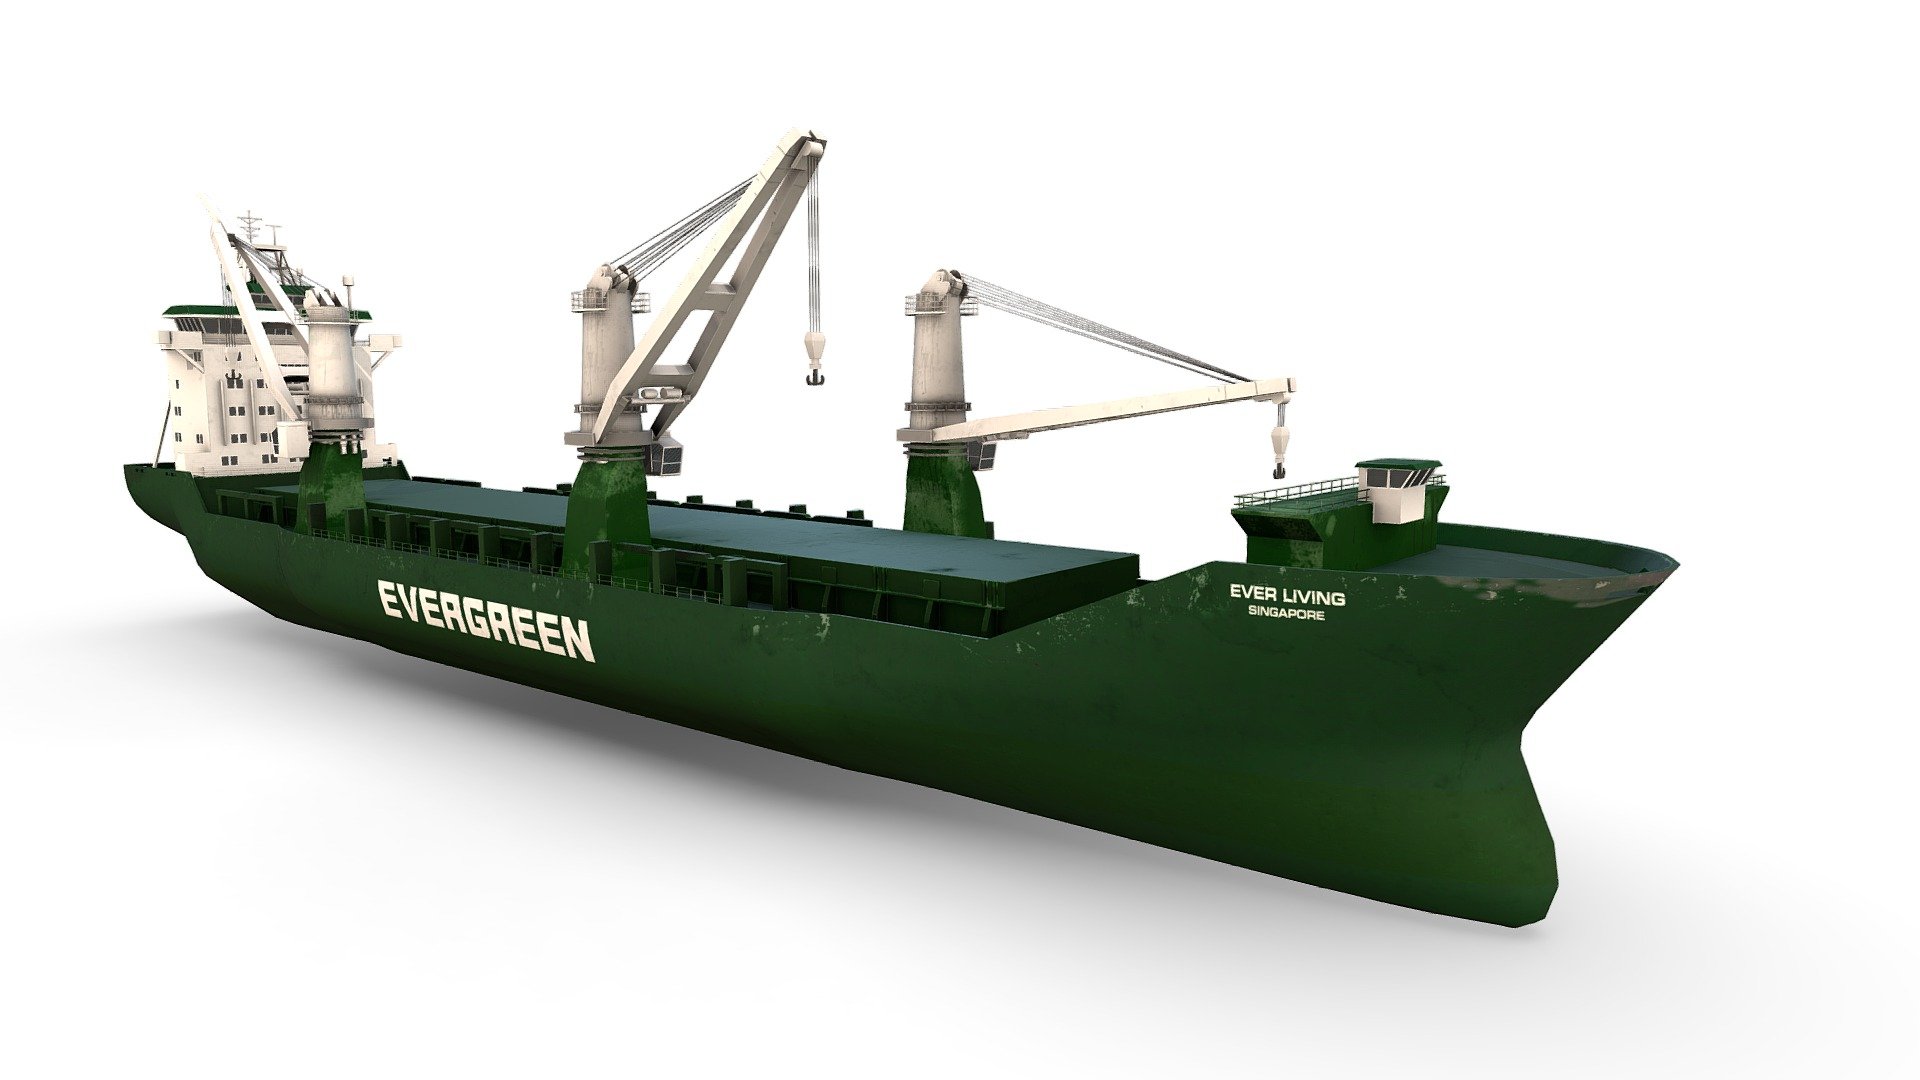 Heavy Lift Multi Purpose Cargo Ship Evergreen

Additional file contains: 8 x textures in native 4K: 2 x base diffuse and 2 x specular diffuse (with gently baked in AO), 2 x gloss, 2 x norm, 1 x 1K base for windows glass. Contained are also the file formats .fbx, .obj, .3ds and .max (native 2014) 3d model